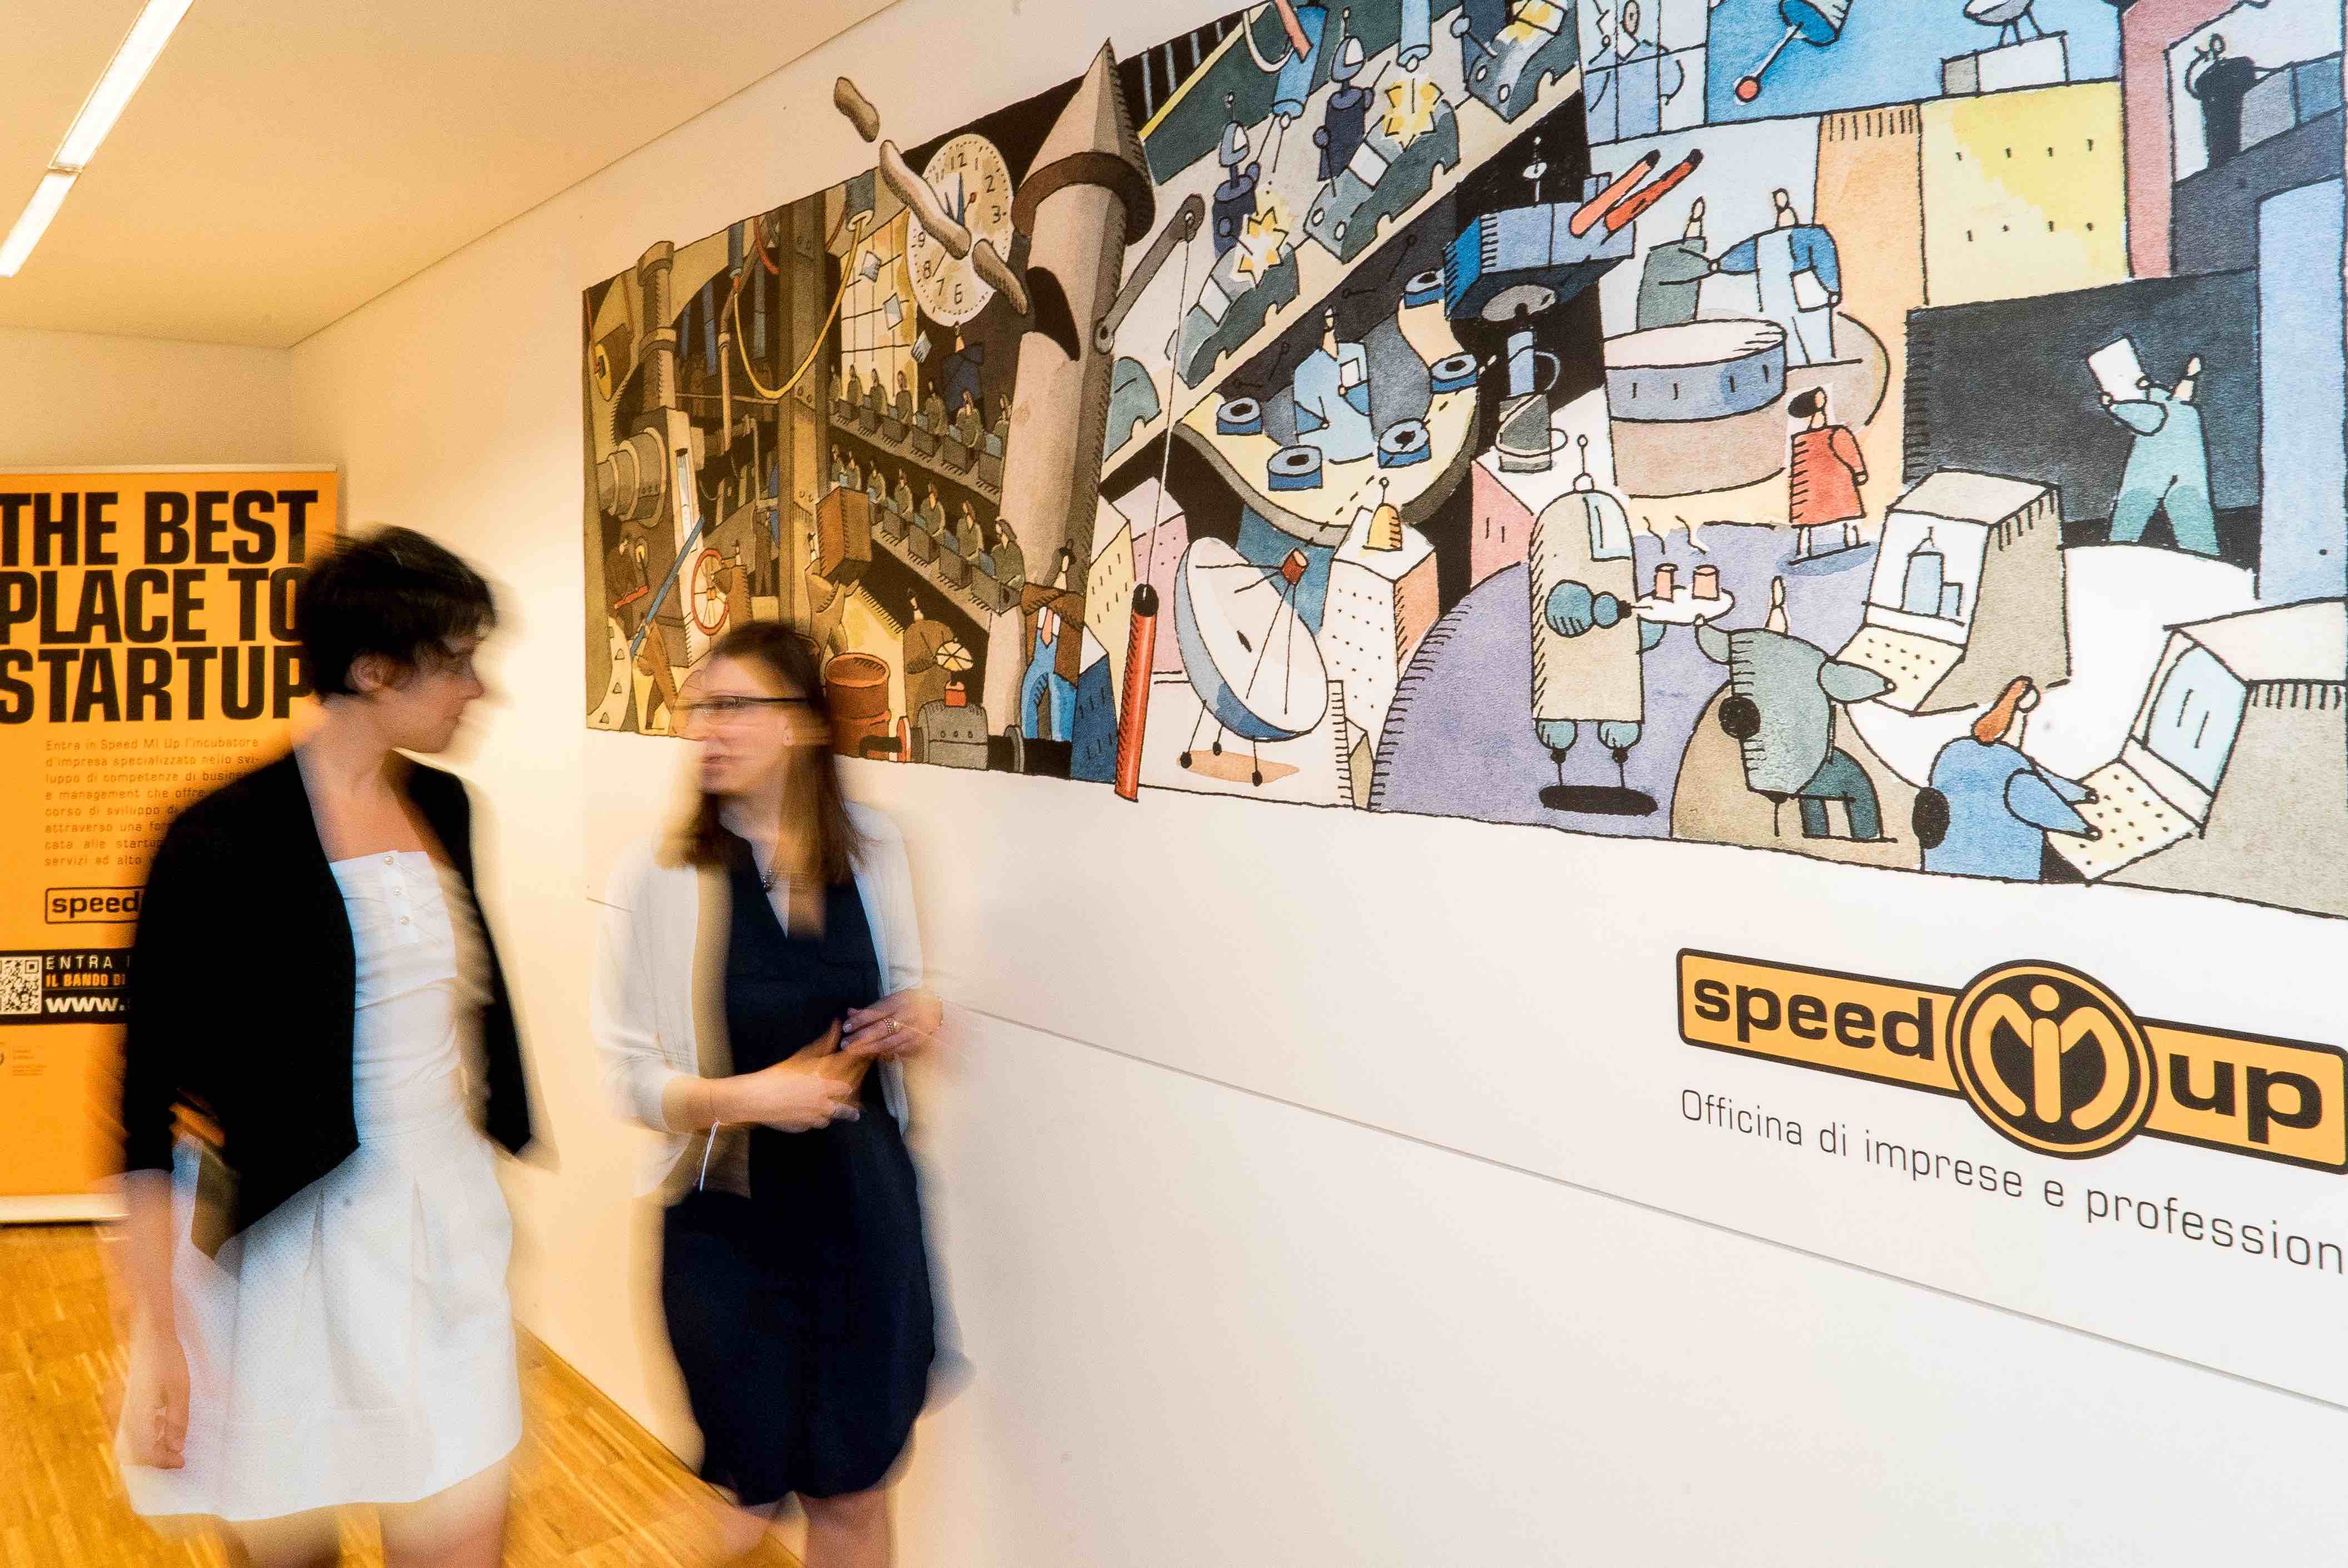 Speed MI Up and a “special call” promoted by the Pesenti Foundation